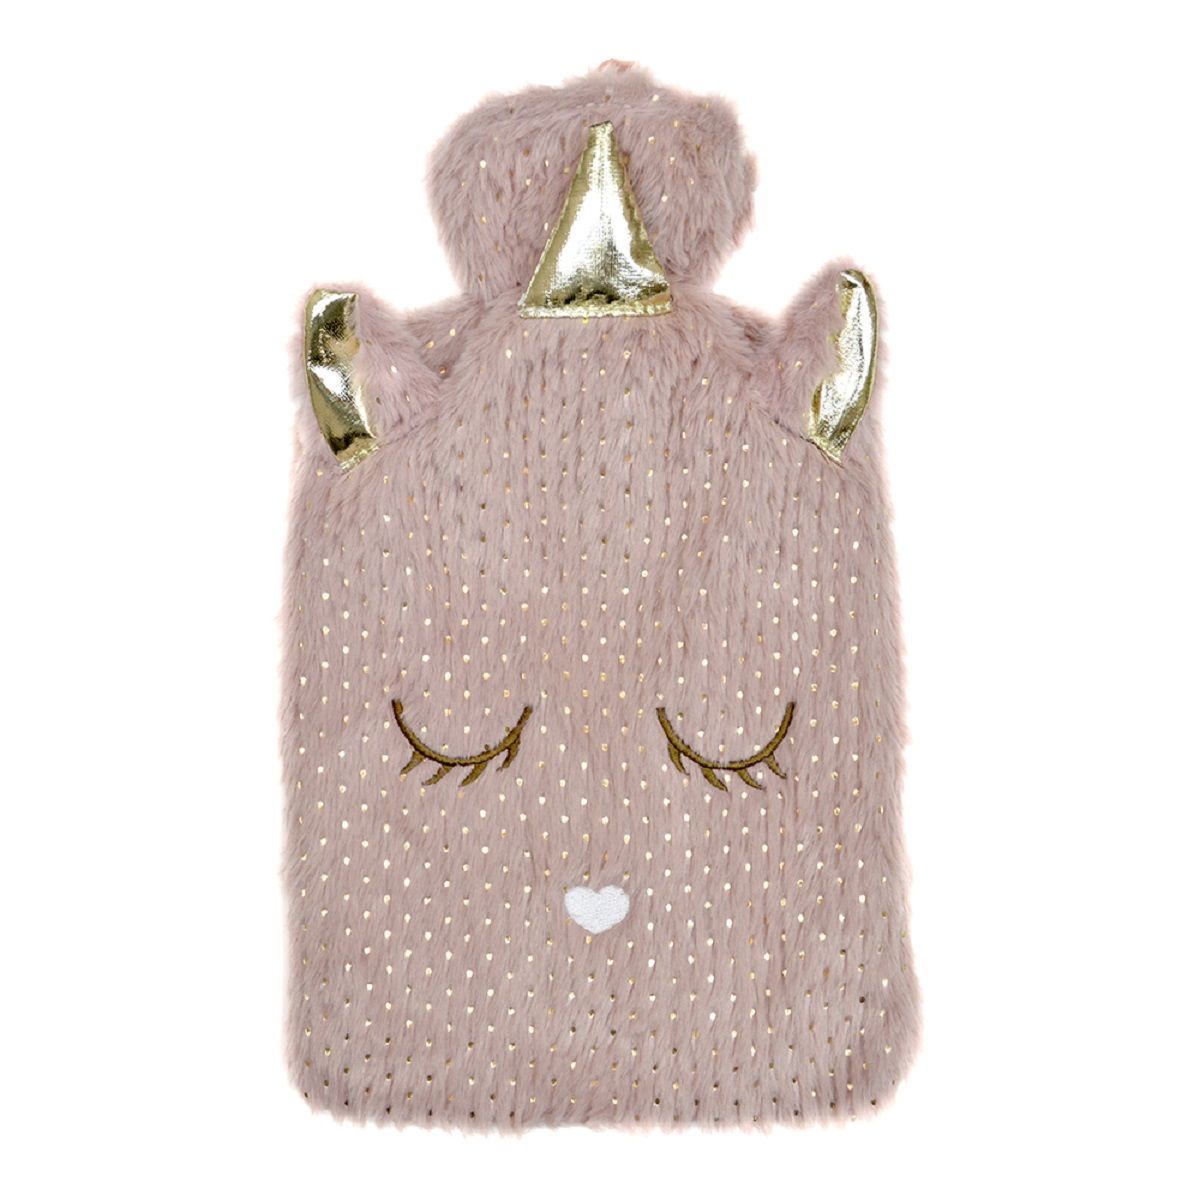 2 litre Hot Water Bottle with Foil Print Unicorn Cover and Eyemask